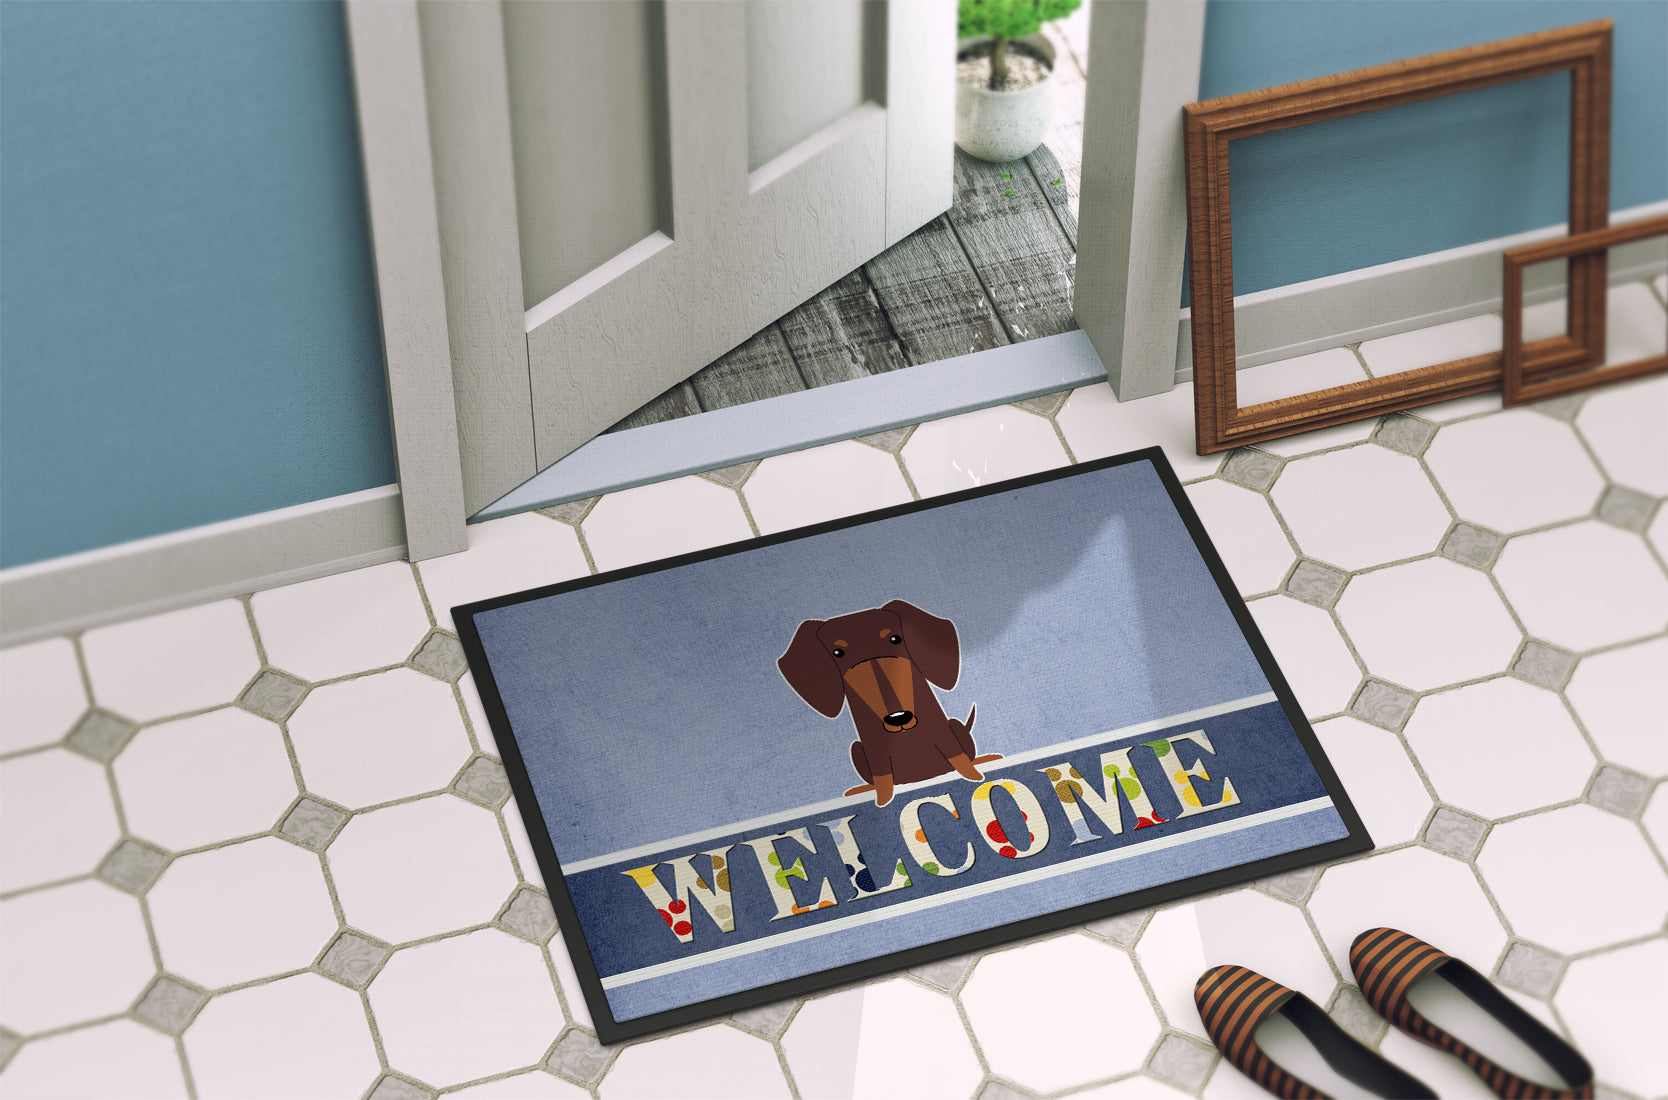 Dachshund Chocolate Welcome Indoor or Outdoor Mat 18x27 BB5712MAT - the-store.com